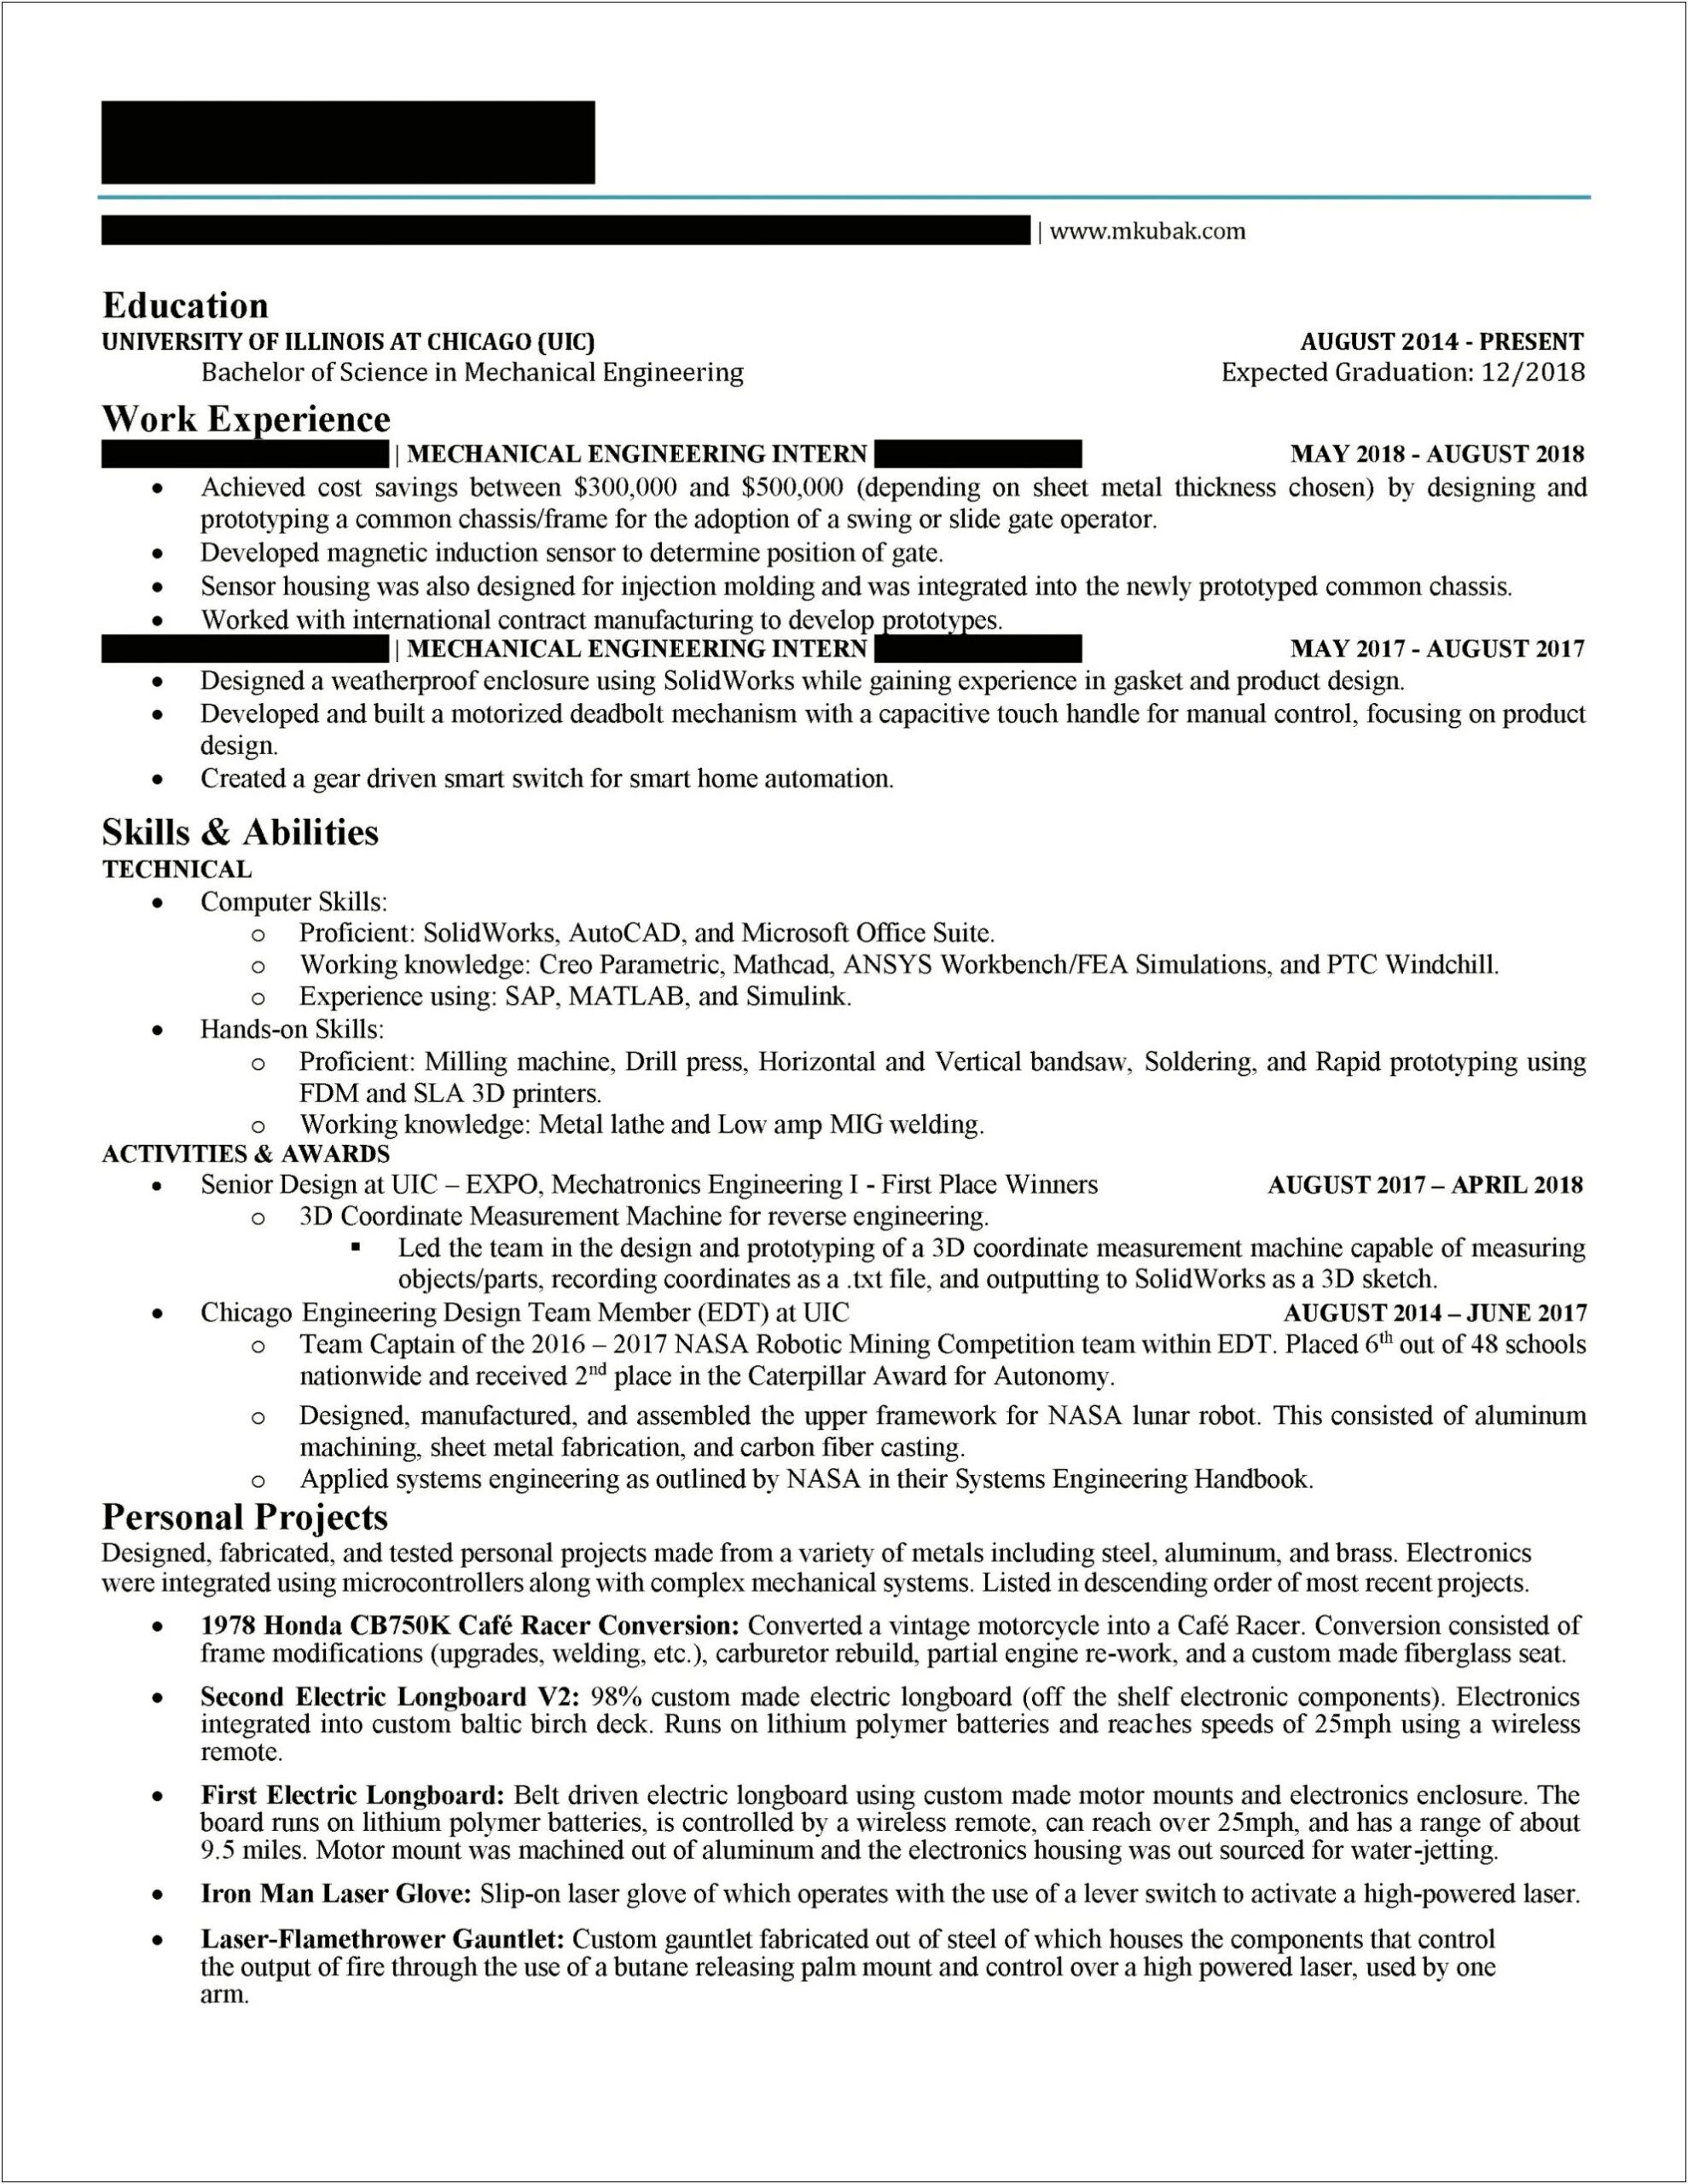 Best Resume 2018 Reddit Sheets And Giigles